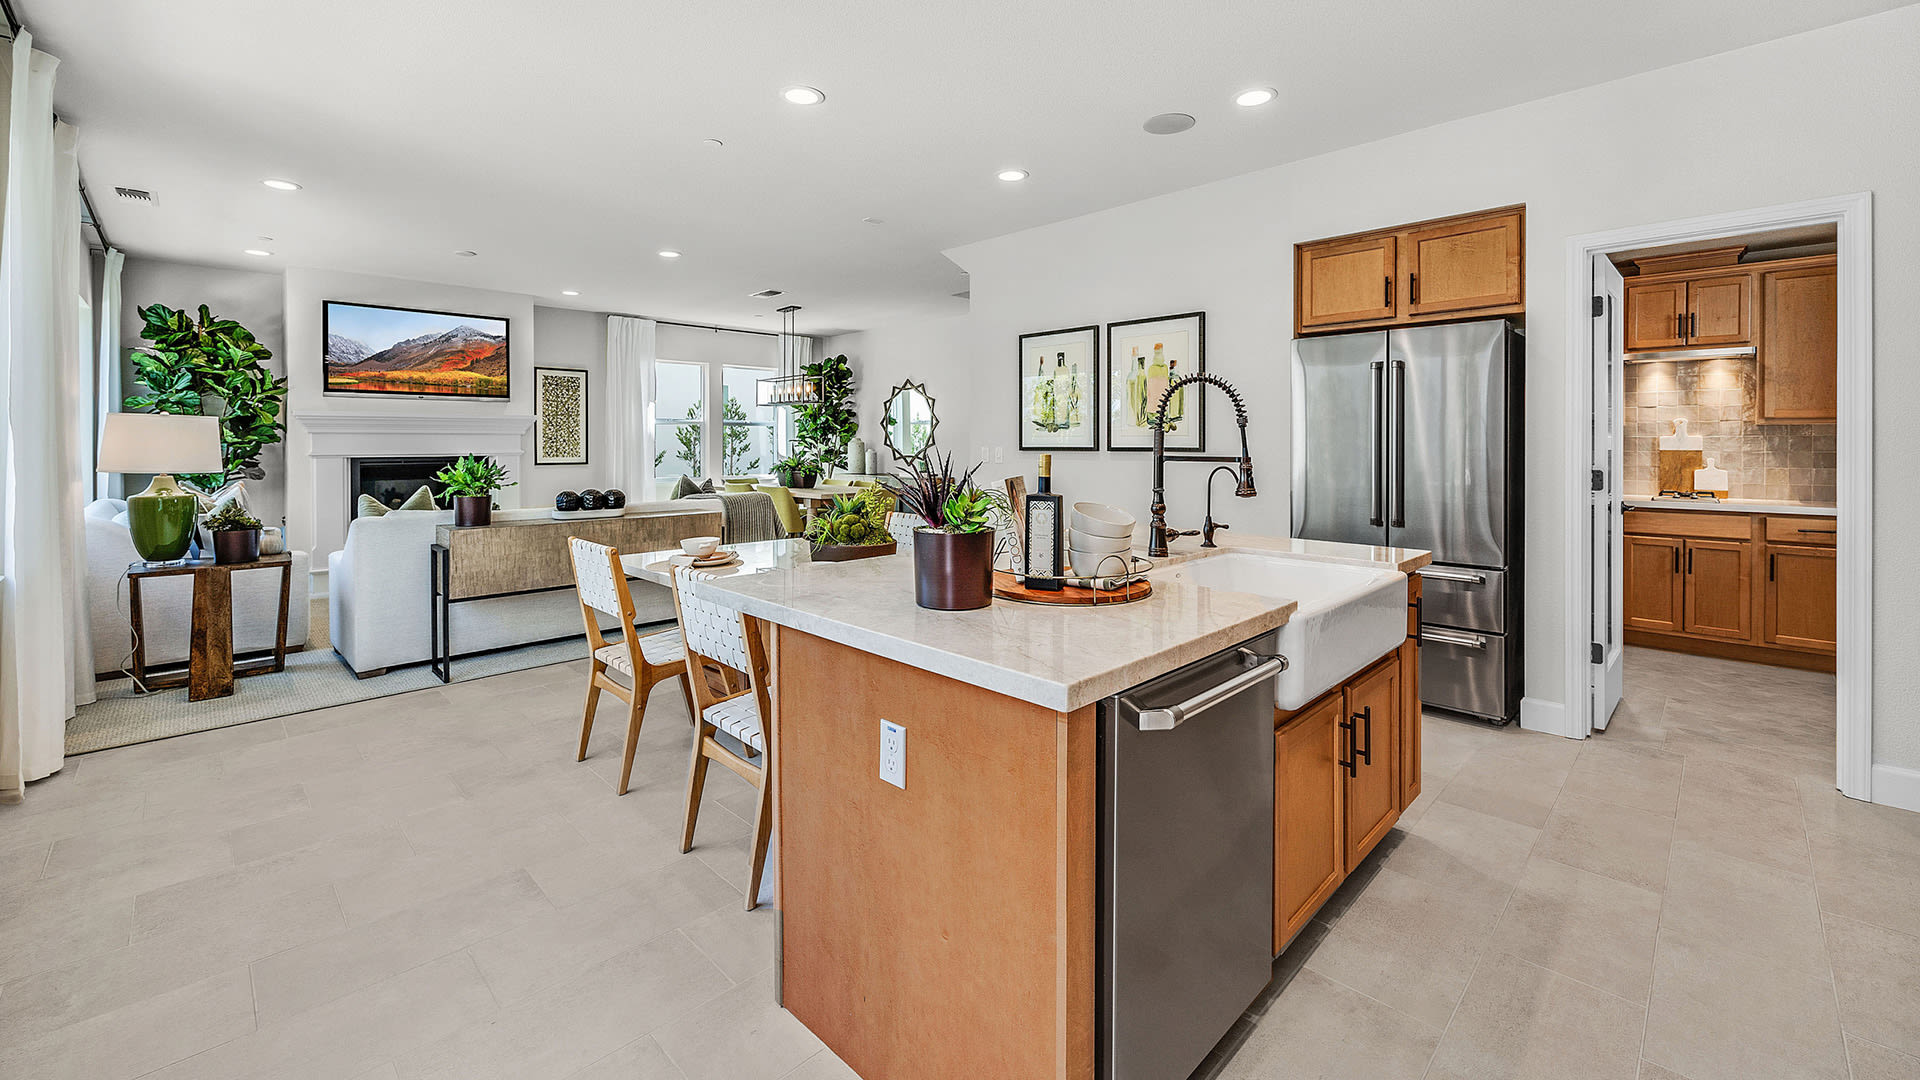 Kitchen & Great Room | Townsend | Landsea at Ellis | New Homes in Tracy, CA | Landsea Homes